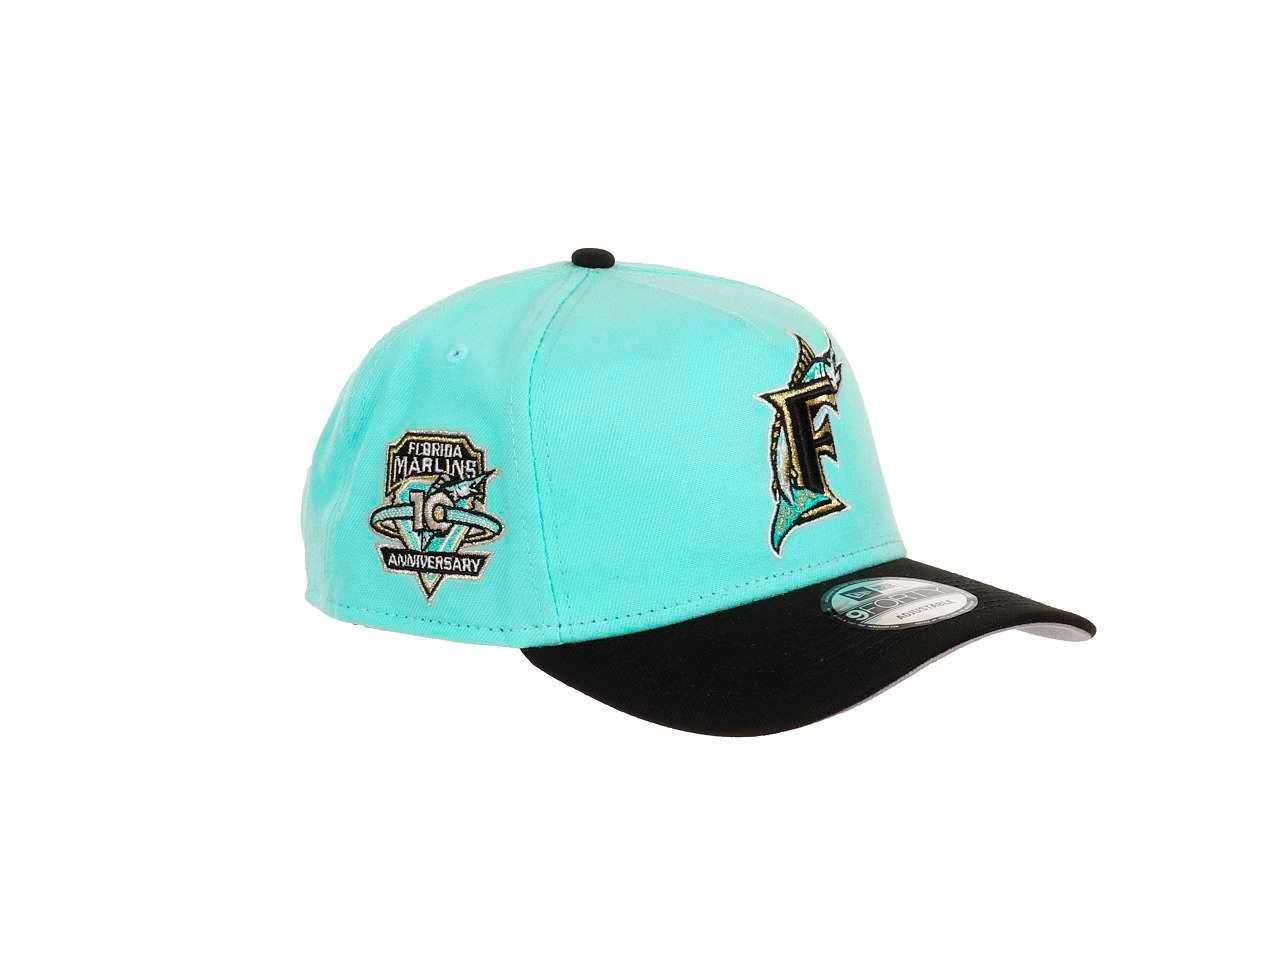 Florida Marlins MLB 10th Anniversary Sidepatch Cooperstown Mint Black 9Forty A-Frame Snapback Cap New Era